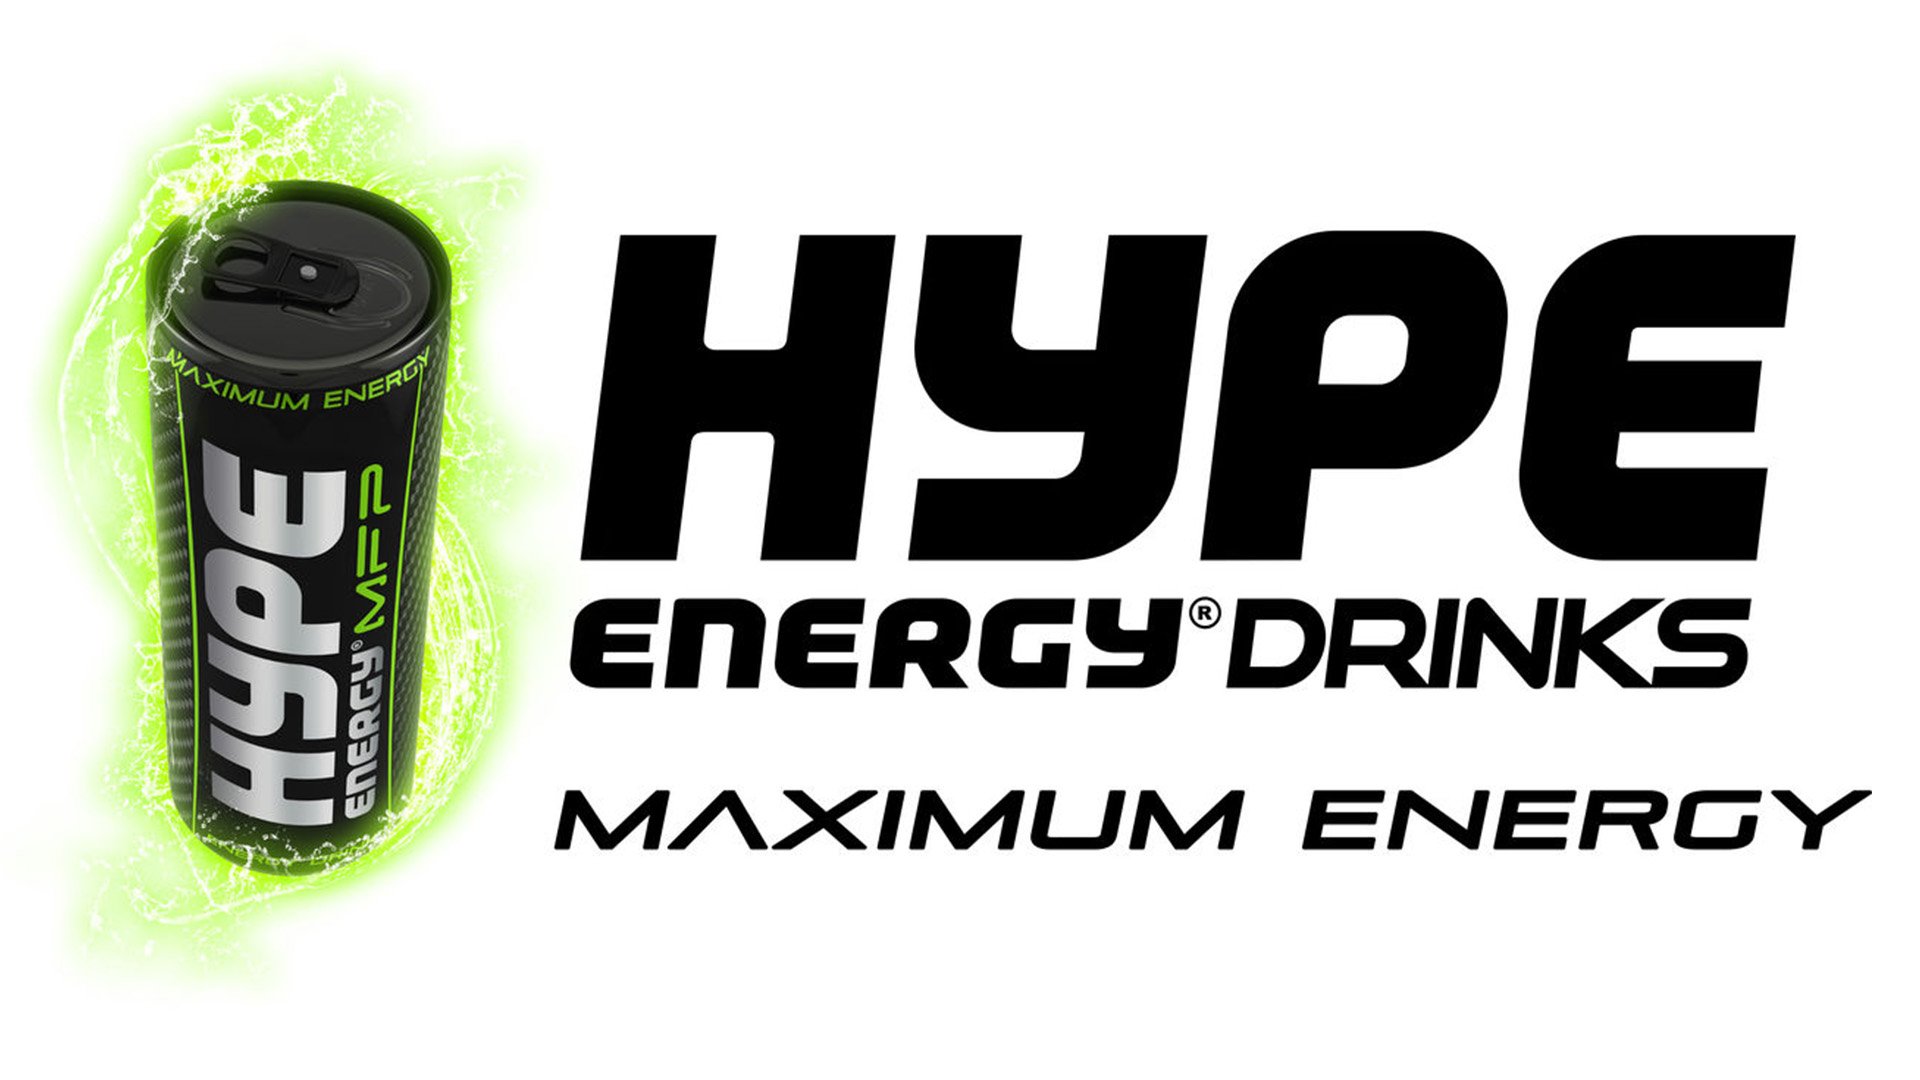 The most popular Energy drink logos and brands